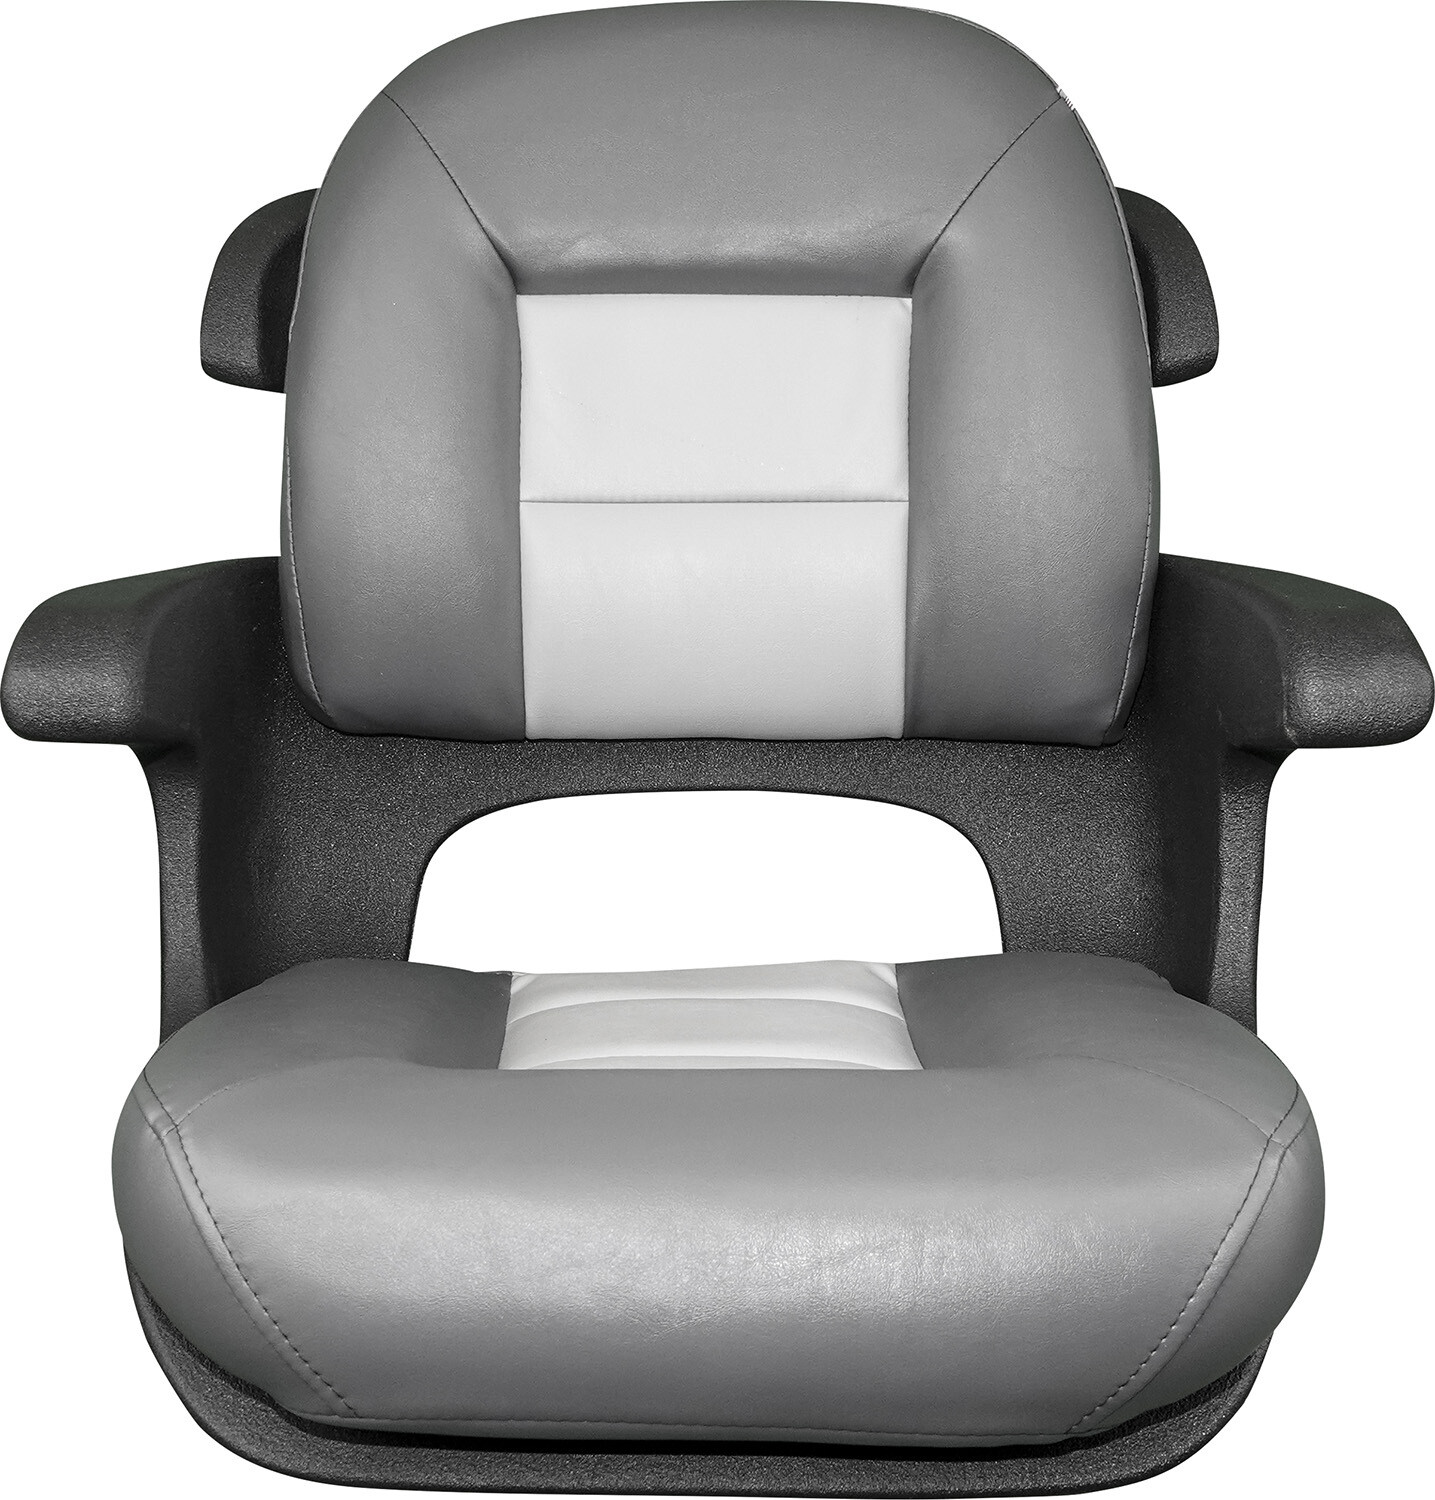 NaviStyle Black & Charcoal High-Back Boat Seat by Tempress at